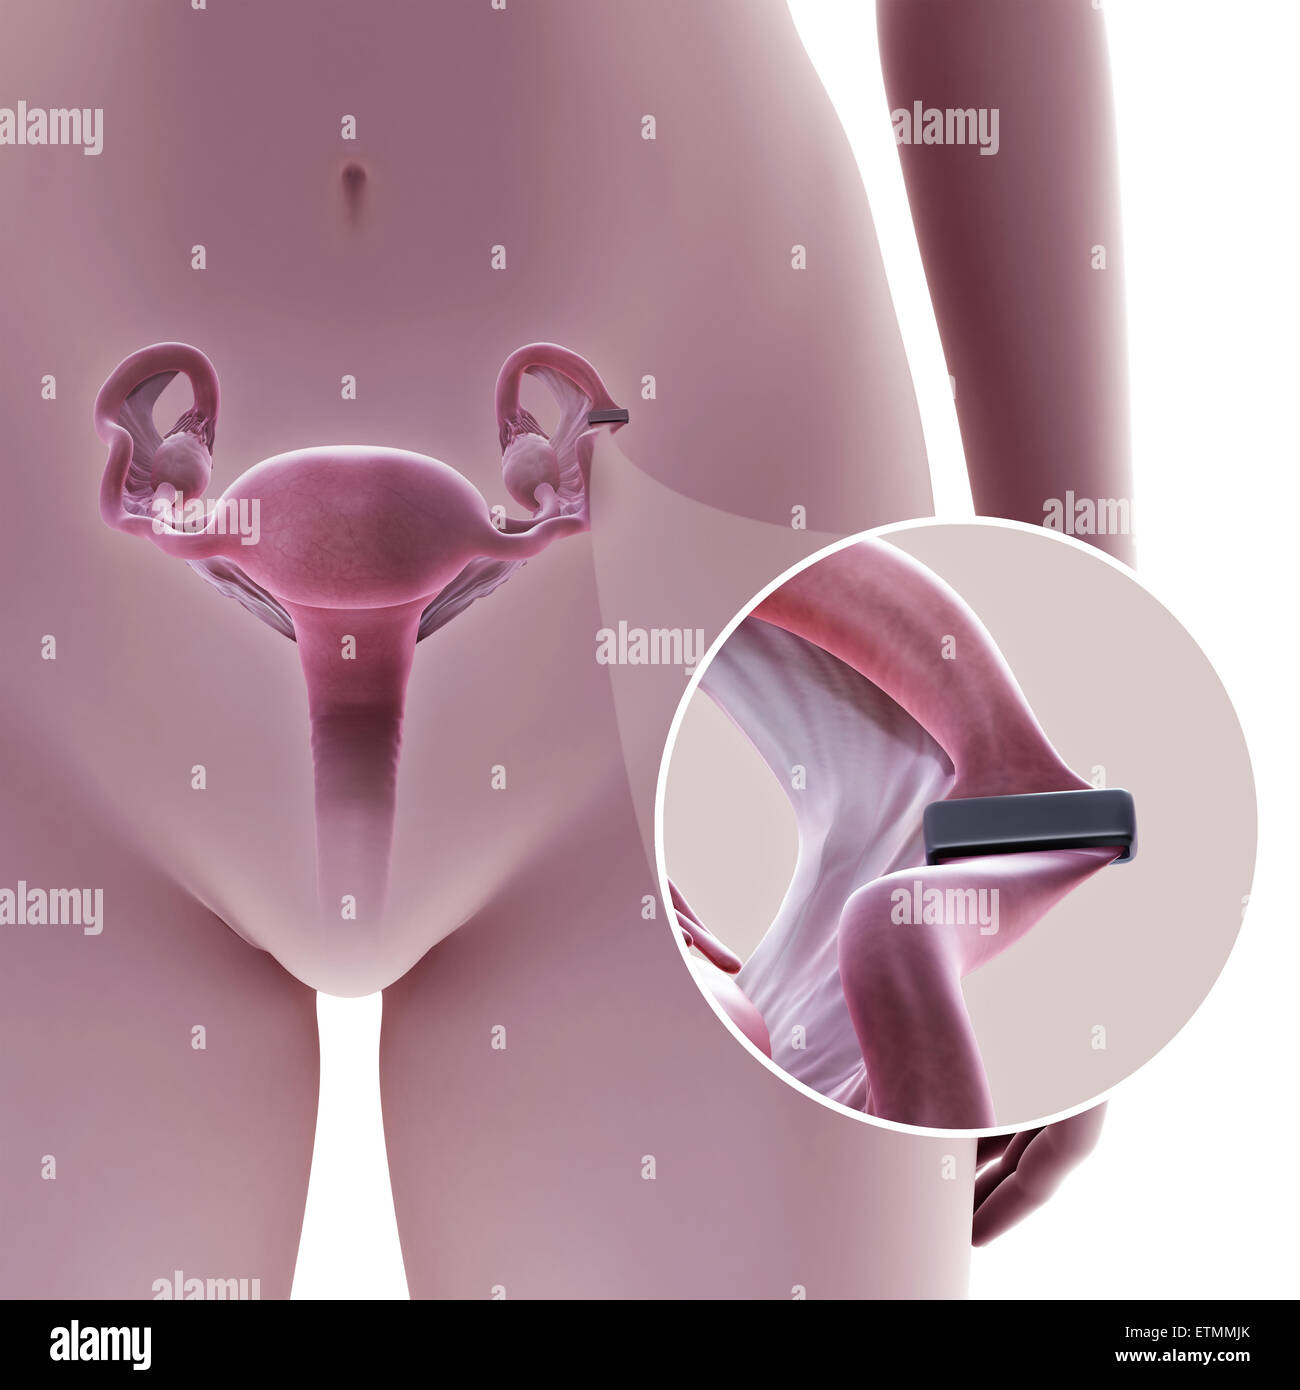 Illustration showing tubal ligation of the Fallopian tube by method of a clip, used to block the tube and prevent fertilization. Stock Photo